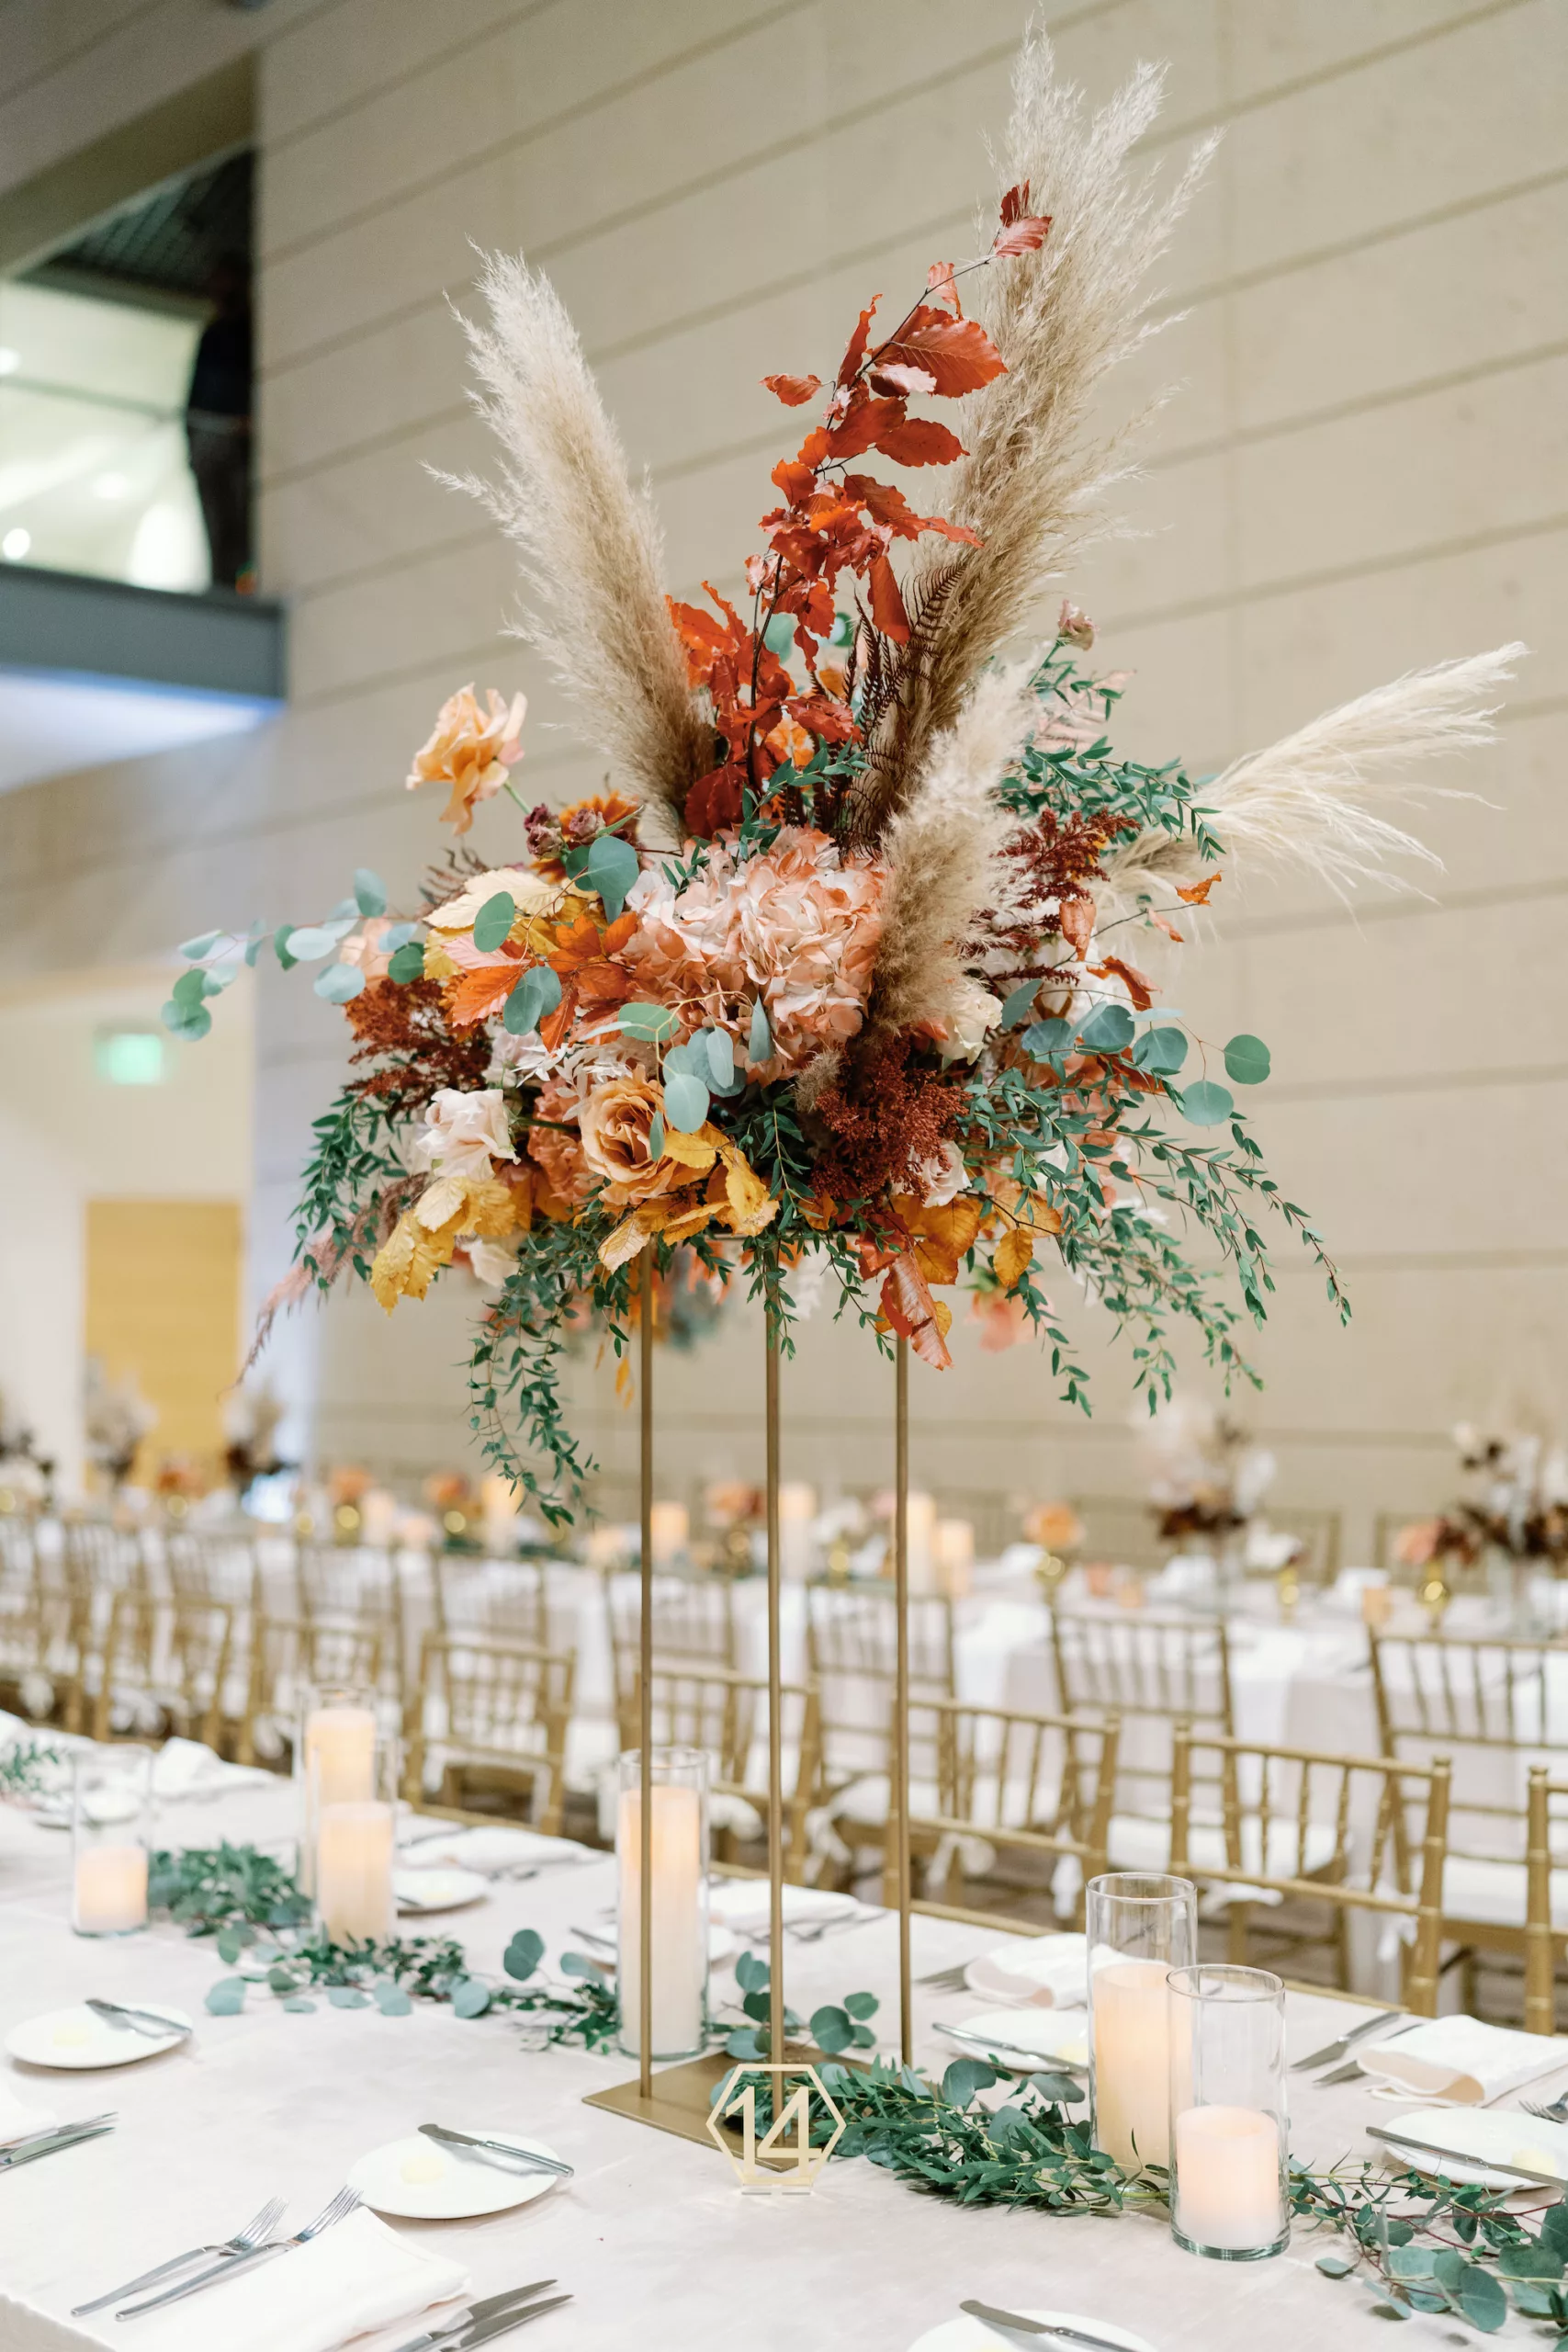 Luxurious Cream and White Wedding Reception Centerpiece Decor Ideas | Greenery Garland, Dried Pampas Grass, Ferns, Greenery, Brown Leaves, and Tall Gold Flower Stand